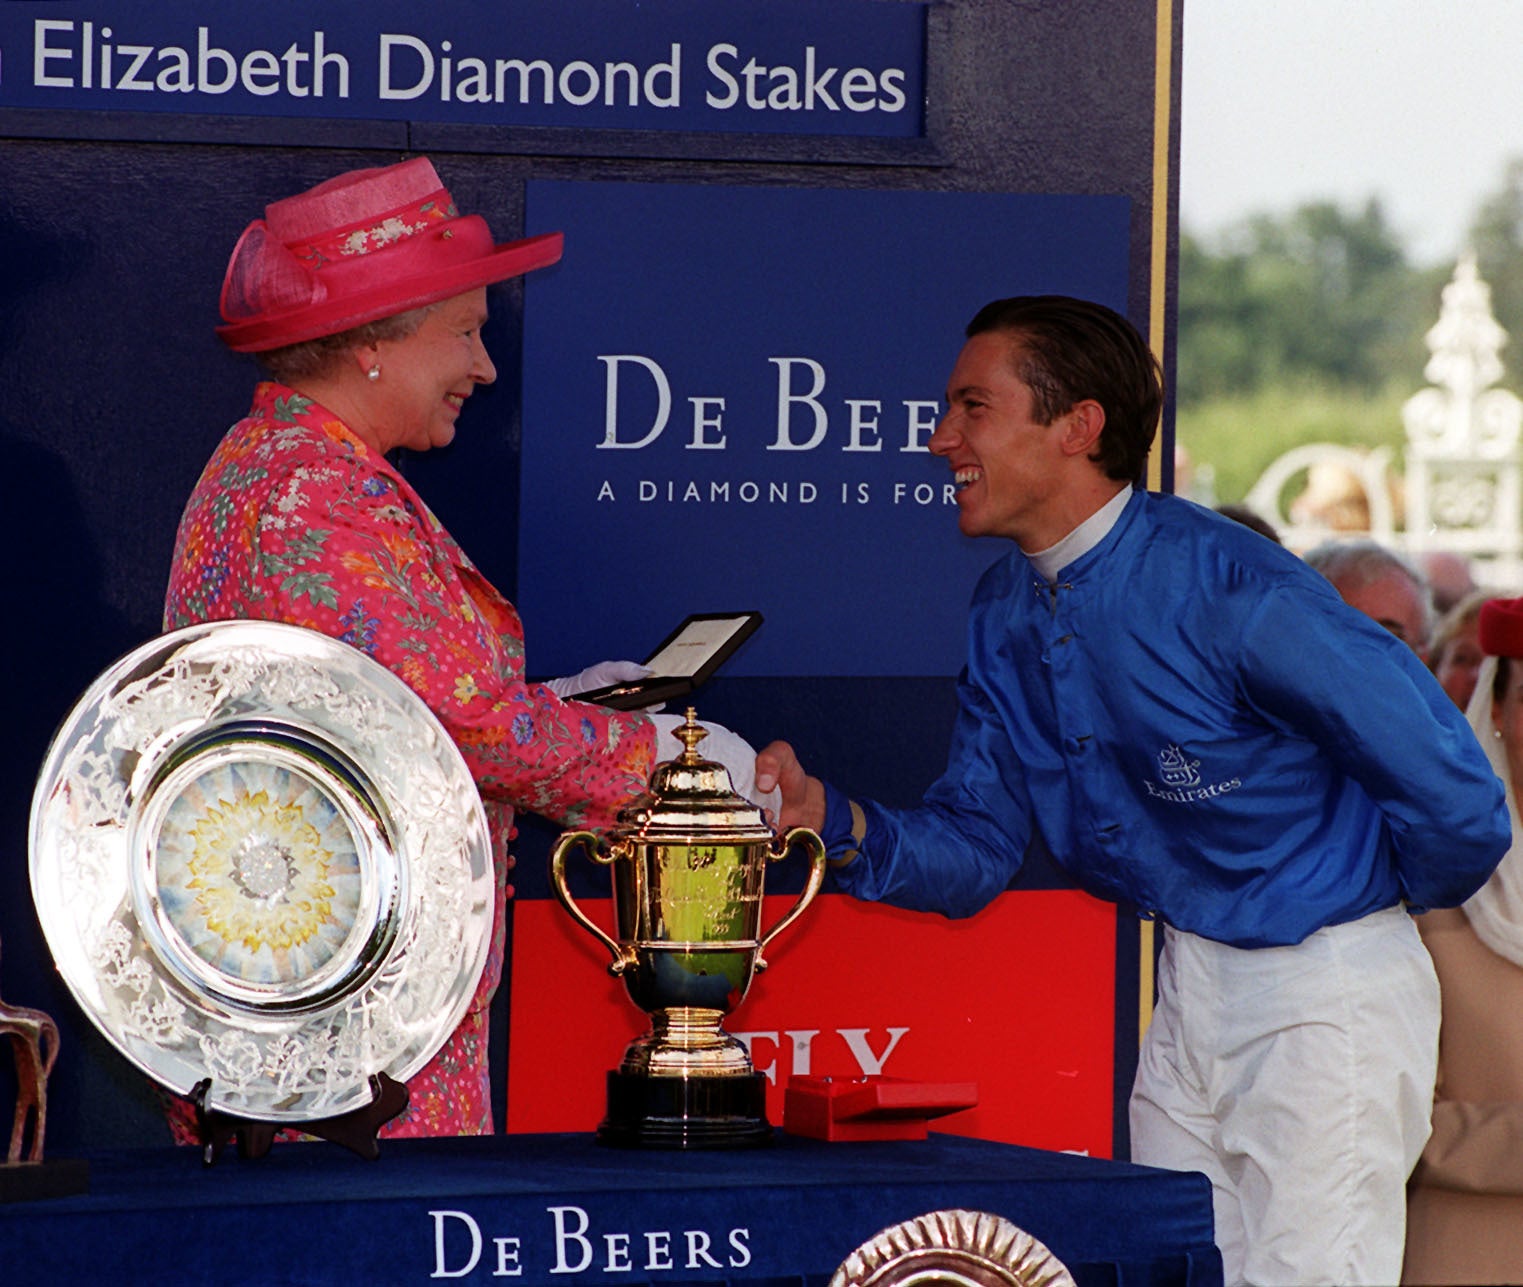 The Queen congratulating Frankie Dettori after he won the 1999 King George VI & Queen Elizabeth Diamond Stakes horserace riding Daylami, at Ascot